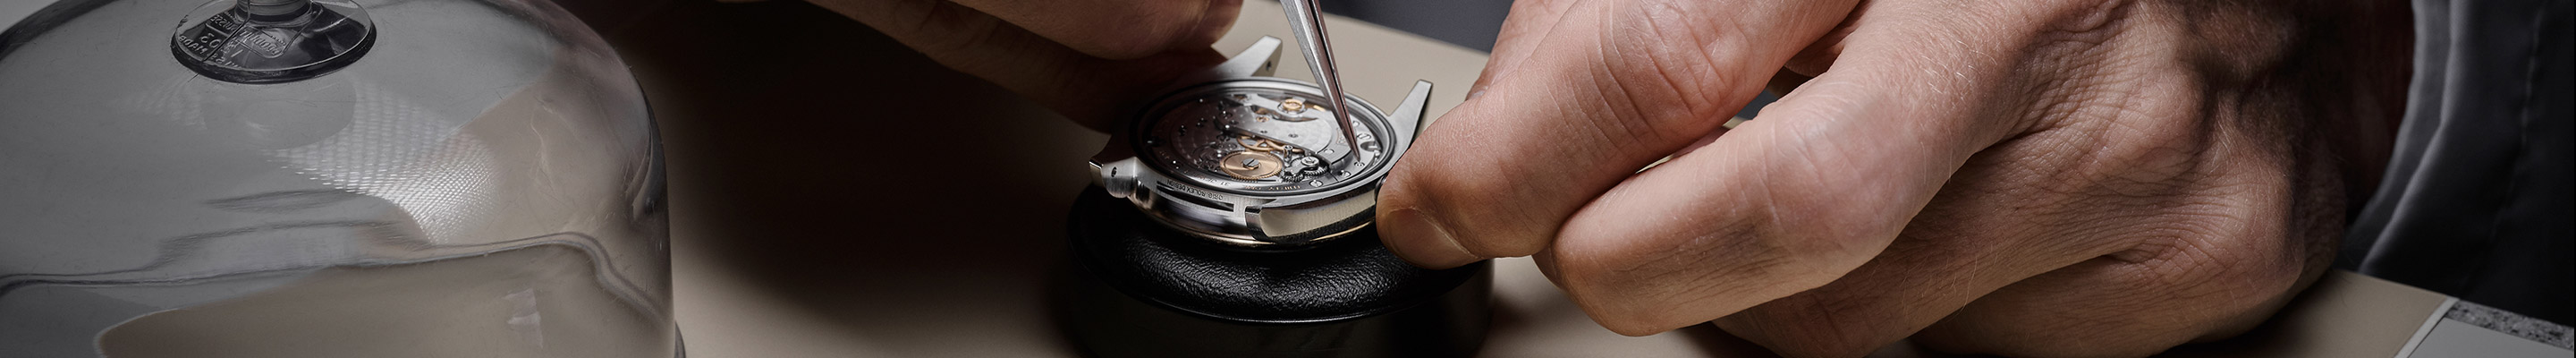 servicing your rolex image banner 01